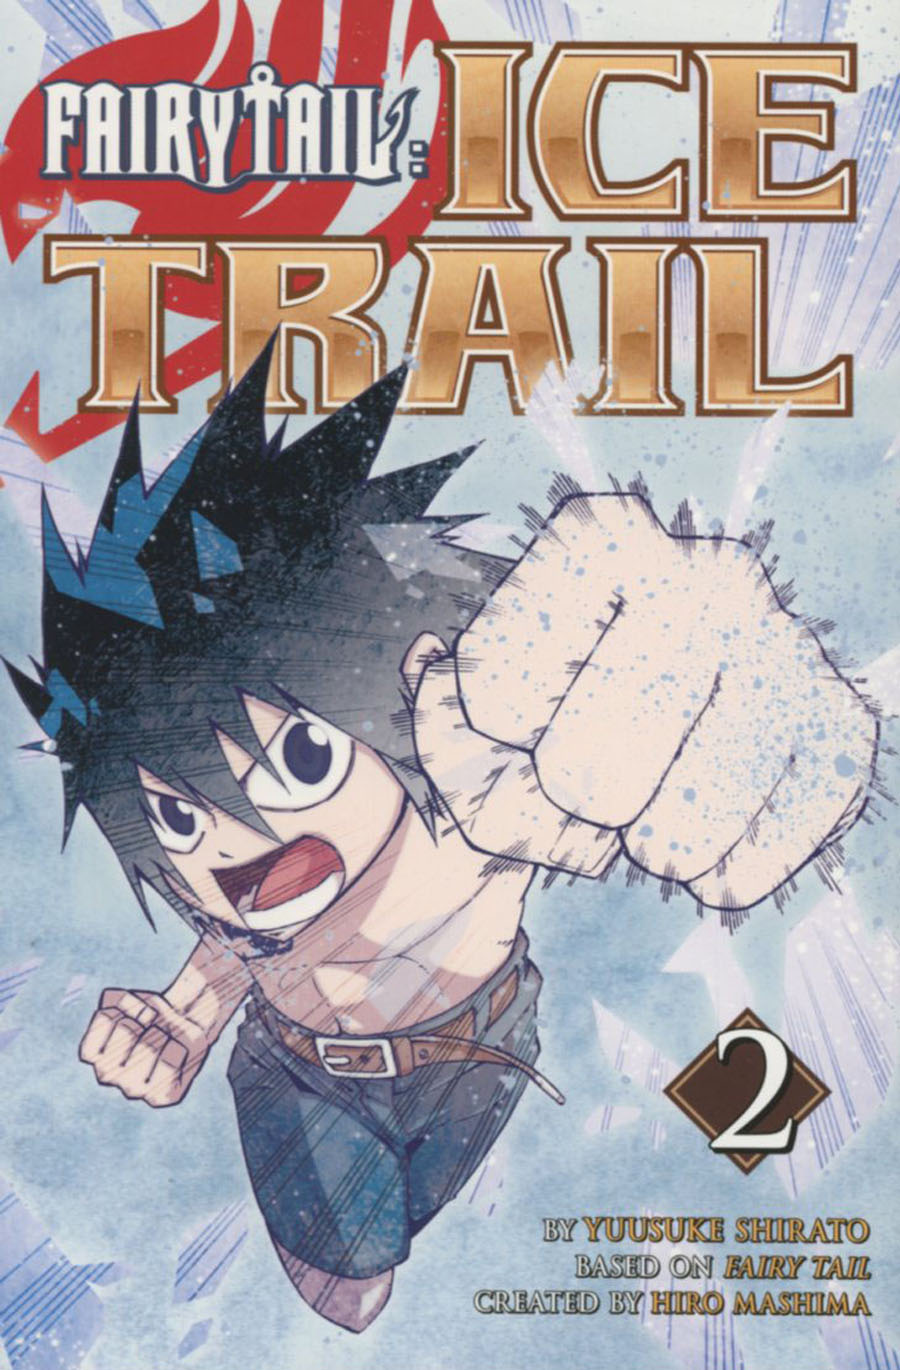 Fairy Tail Ice Trail Vol 2 GN